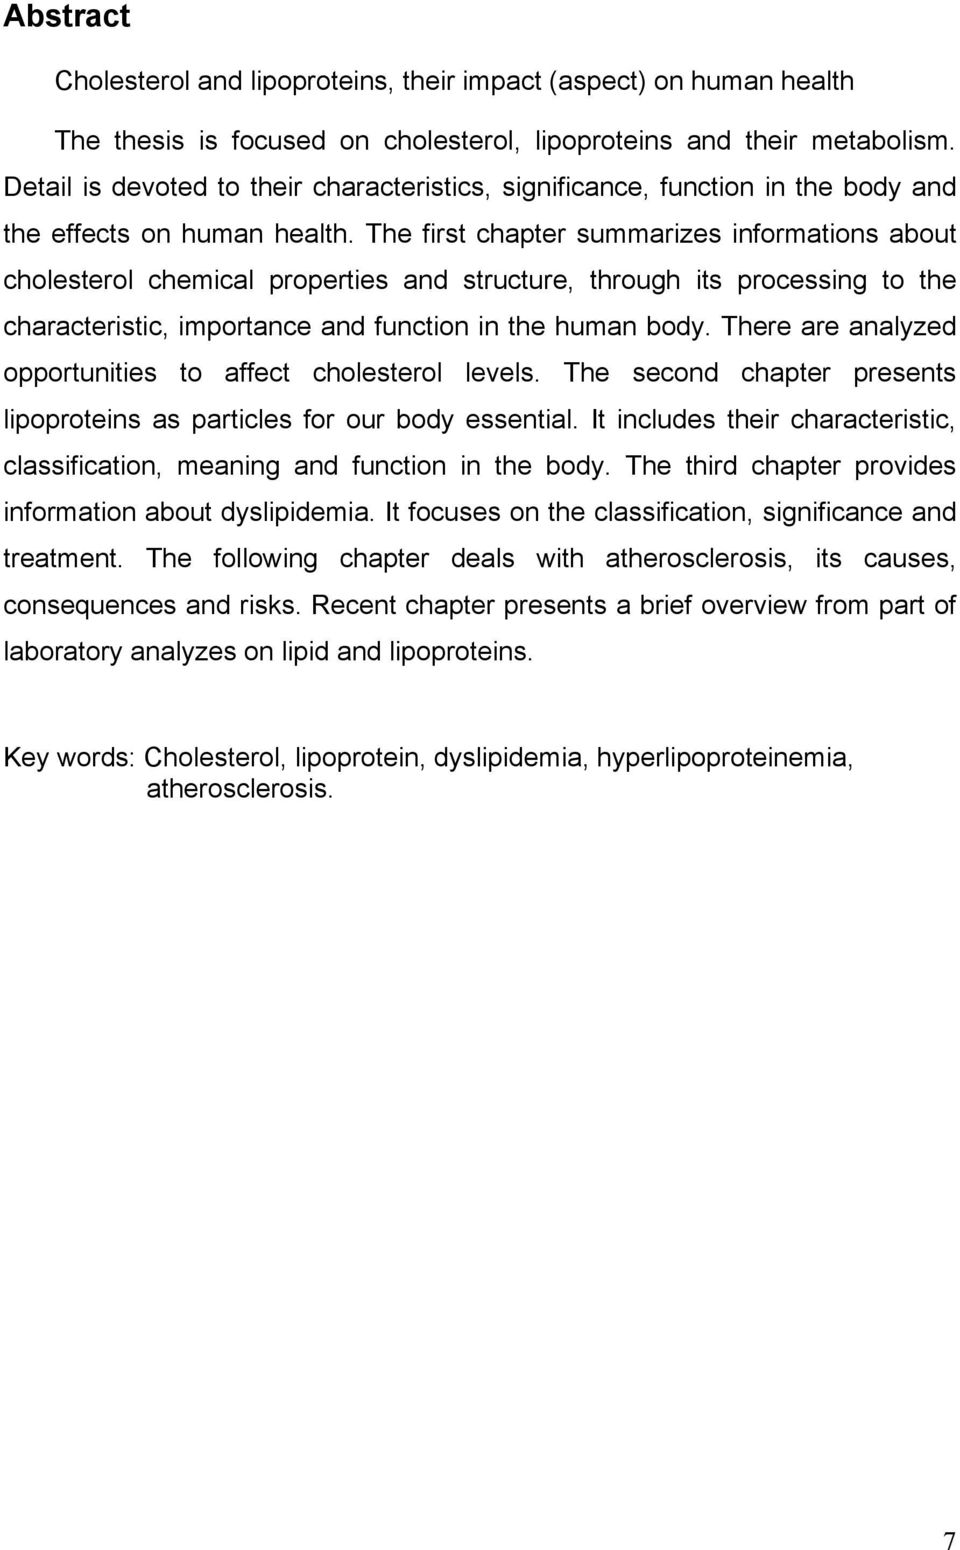 The first chapter summarizes informations about cholesterol chemical properties and structure, through its processing to the characteristic, importance and function in the human body.